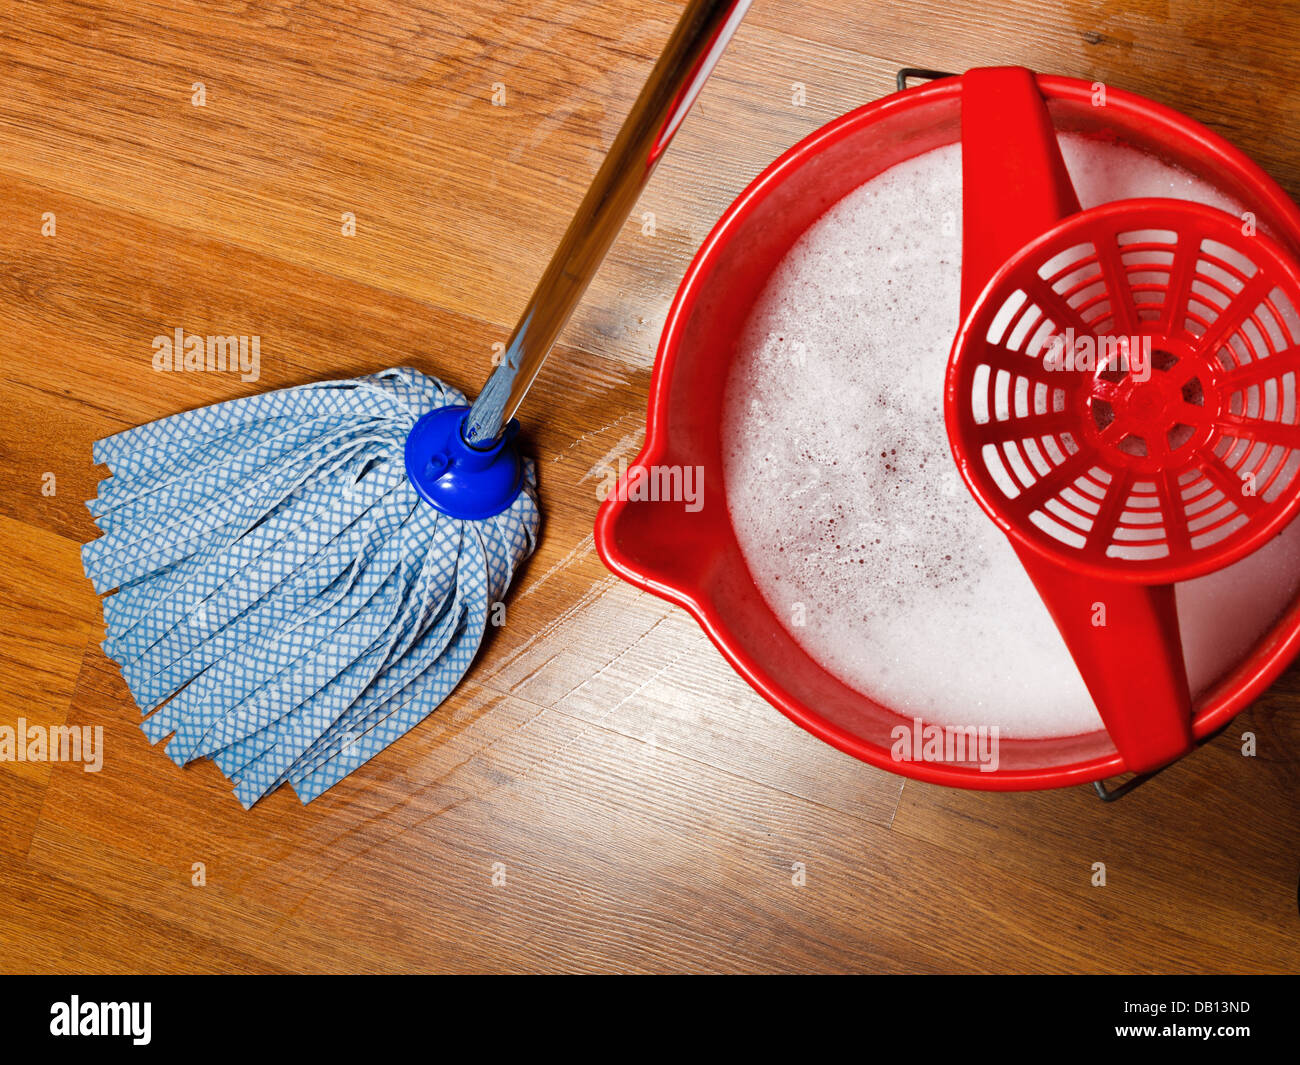 https://c8.alamy.com/comp/DB13ND/top-view-of-mop-and-bucket-with-water-for-cleaning-floors-DB13ND.jpg